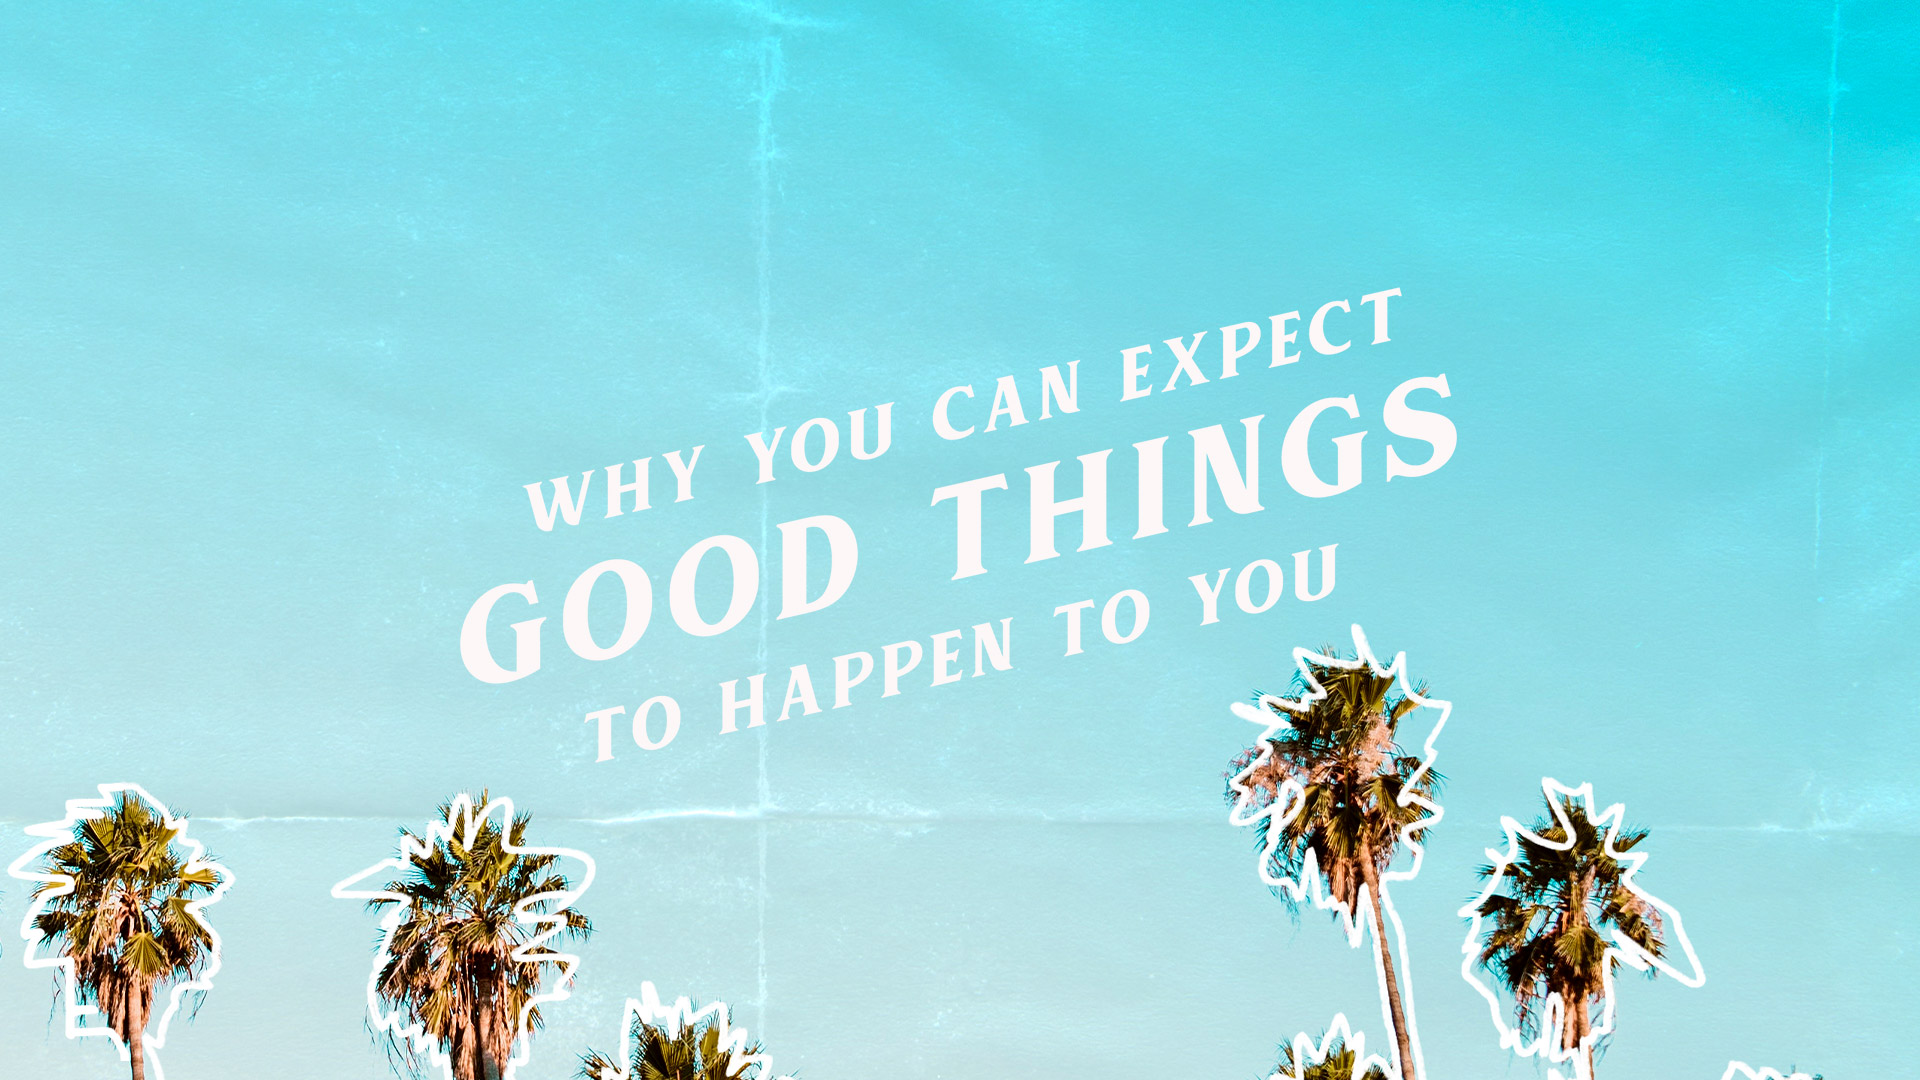 Top 27 How To Expect Good Things To Happen Best 65 Answer